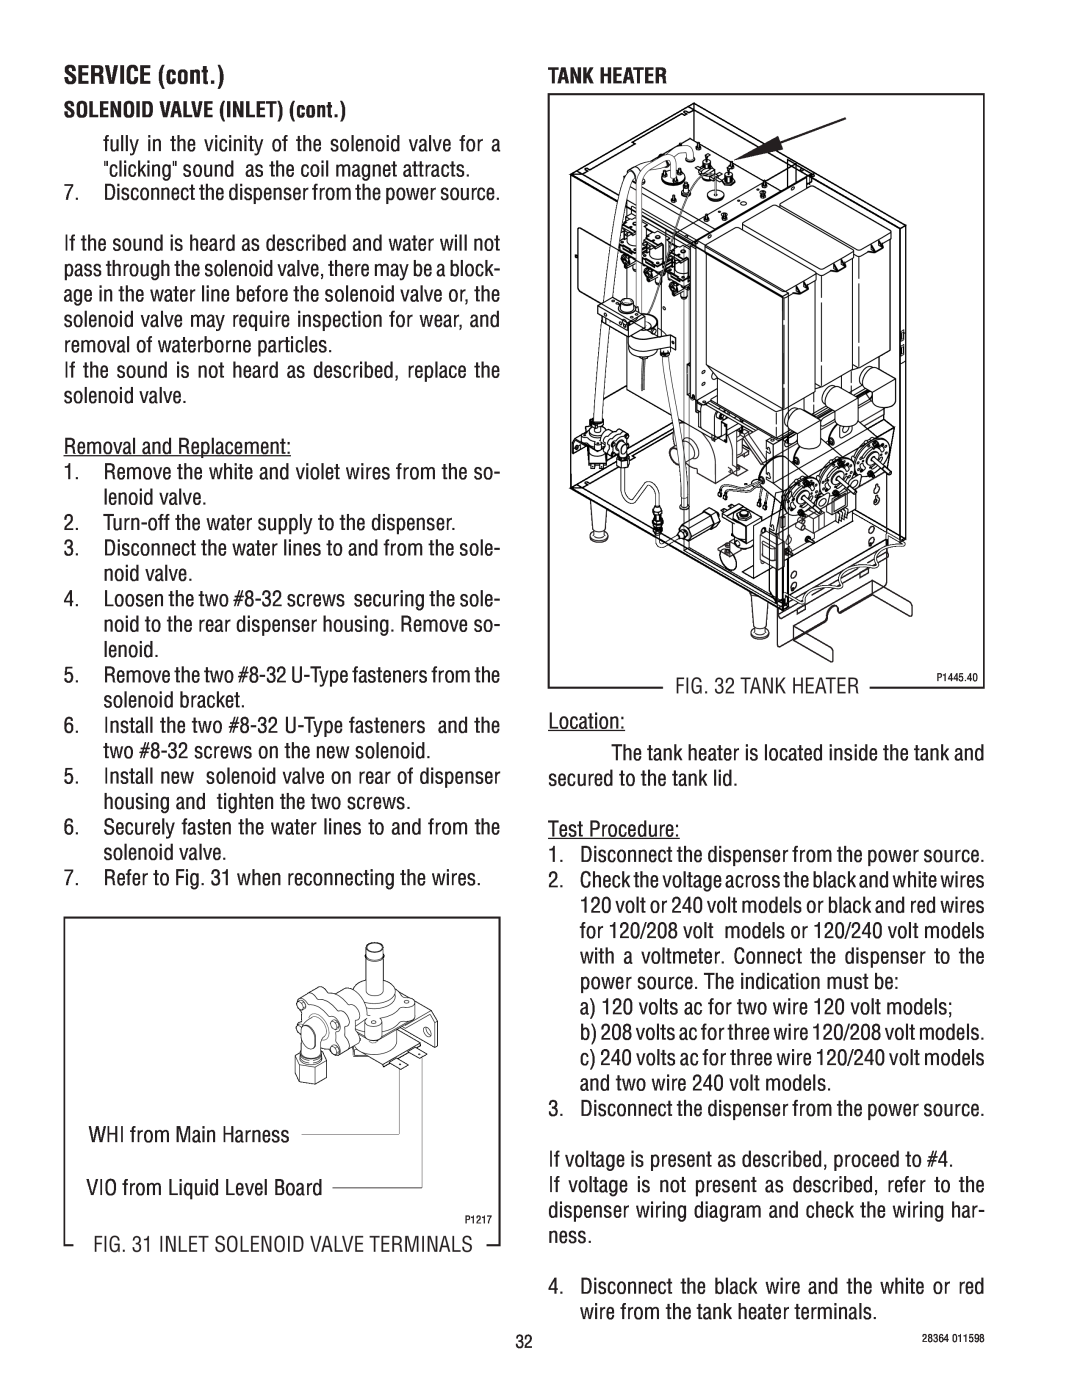 Bunn FMD-3 service manual SOLENOID VALVE INLET cont, Tank Heater, SERVICE cont 